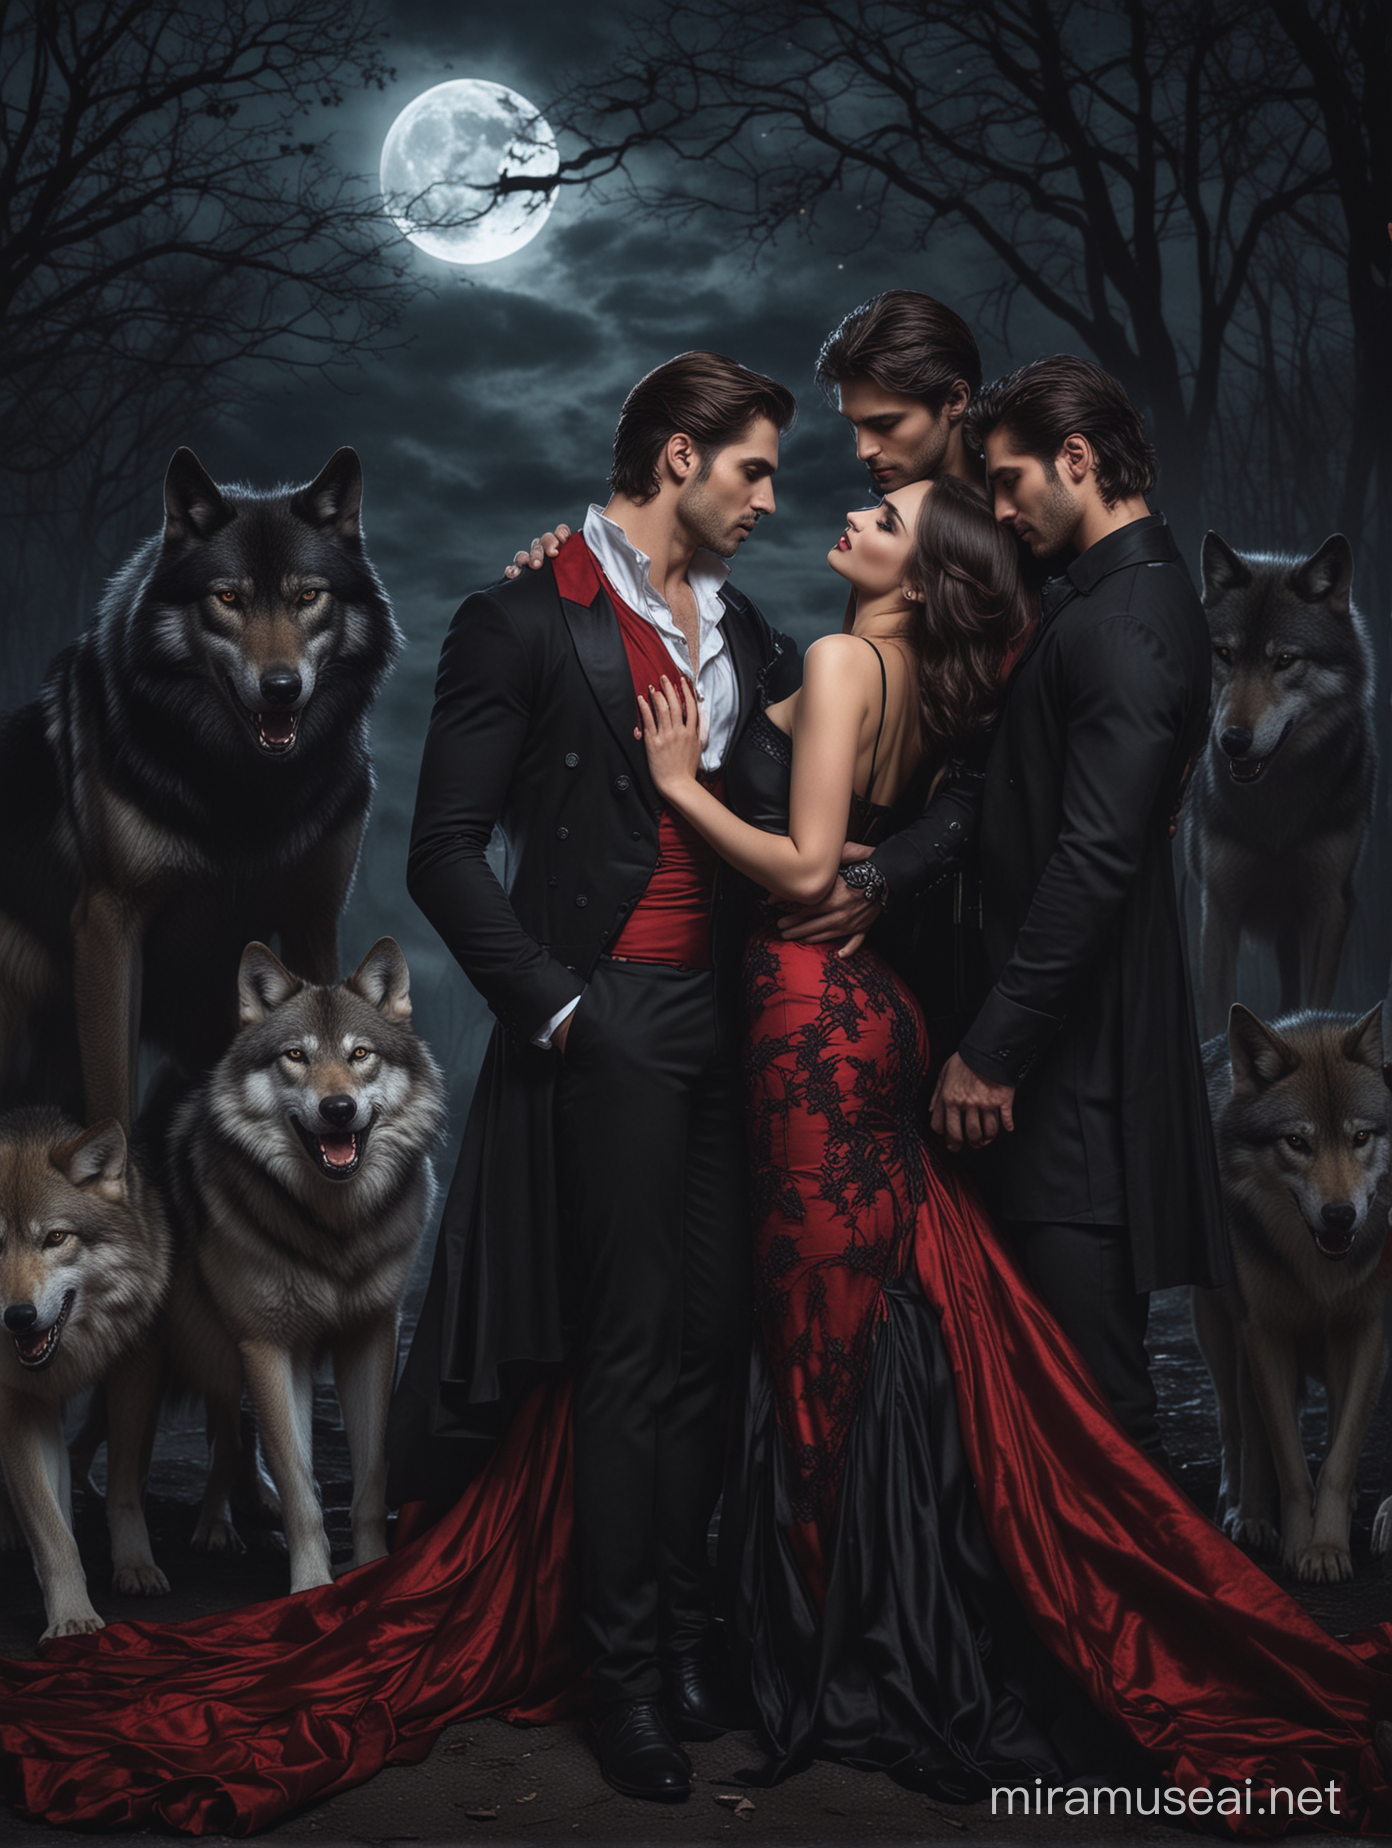 Romantic Encounter Three Men and a Lady Amidst Wolves and Vampires